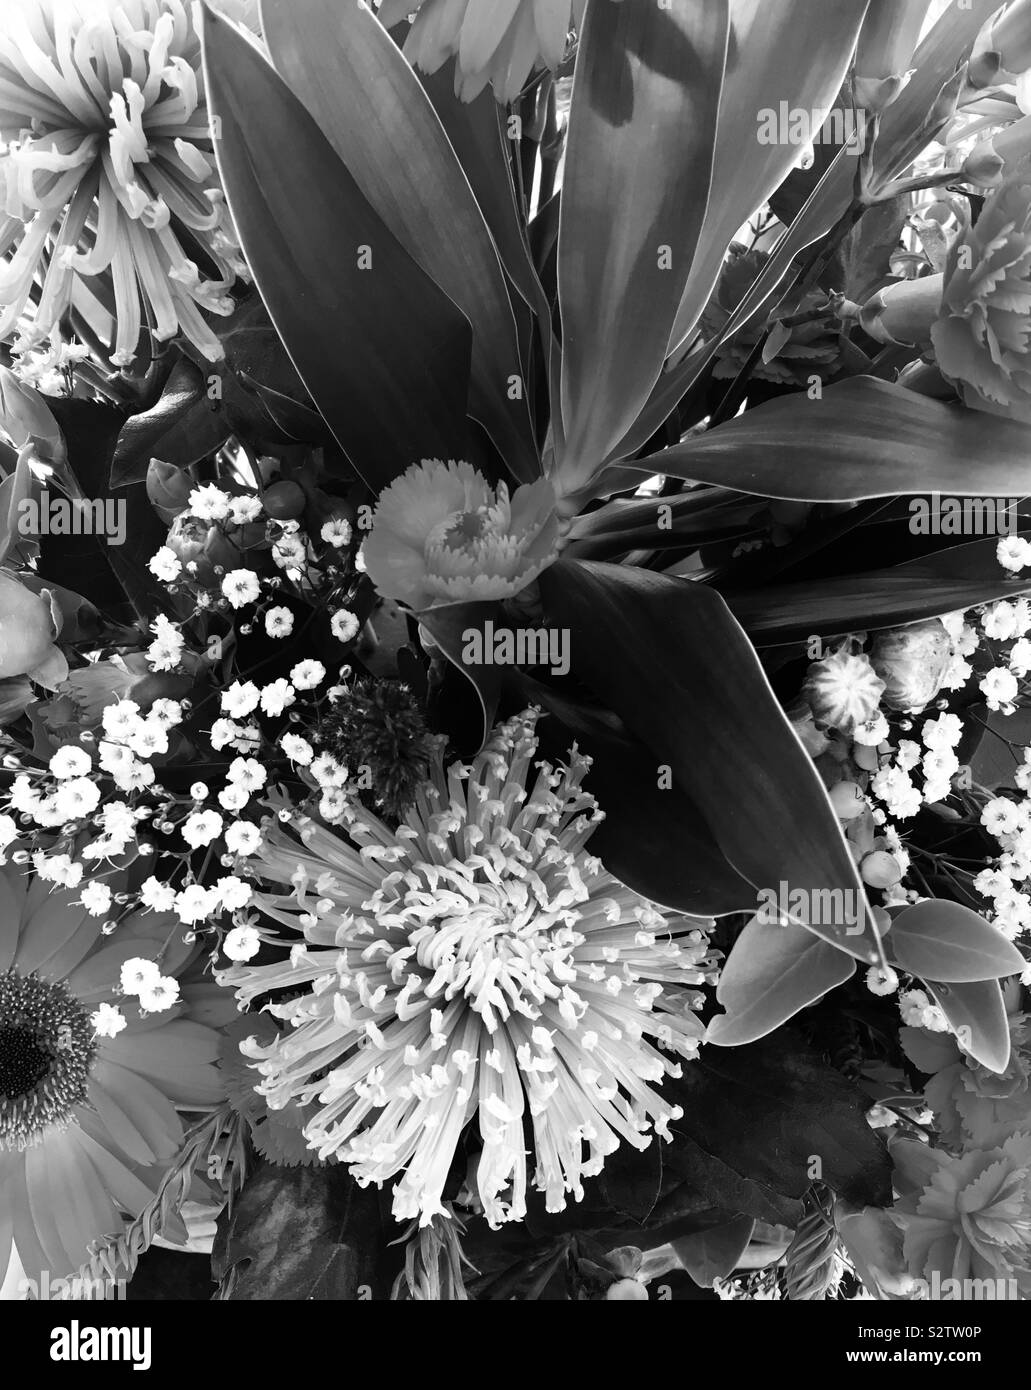 Black and white image of floral display Stock Photo